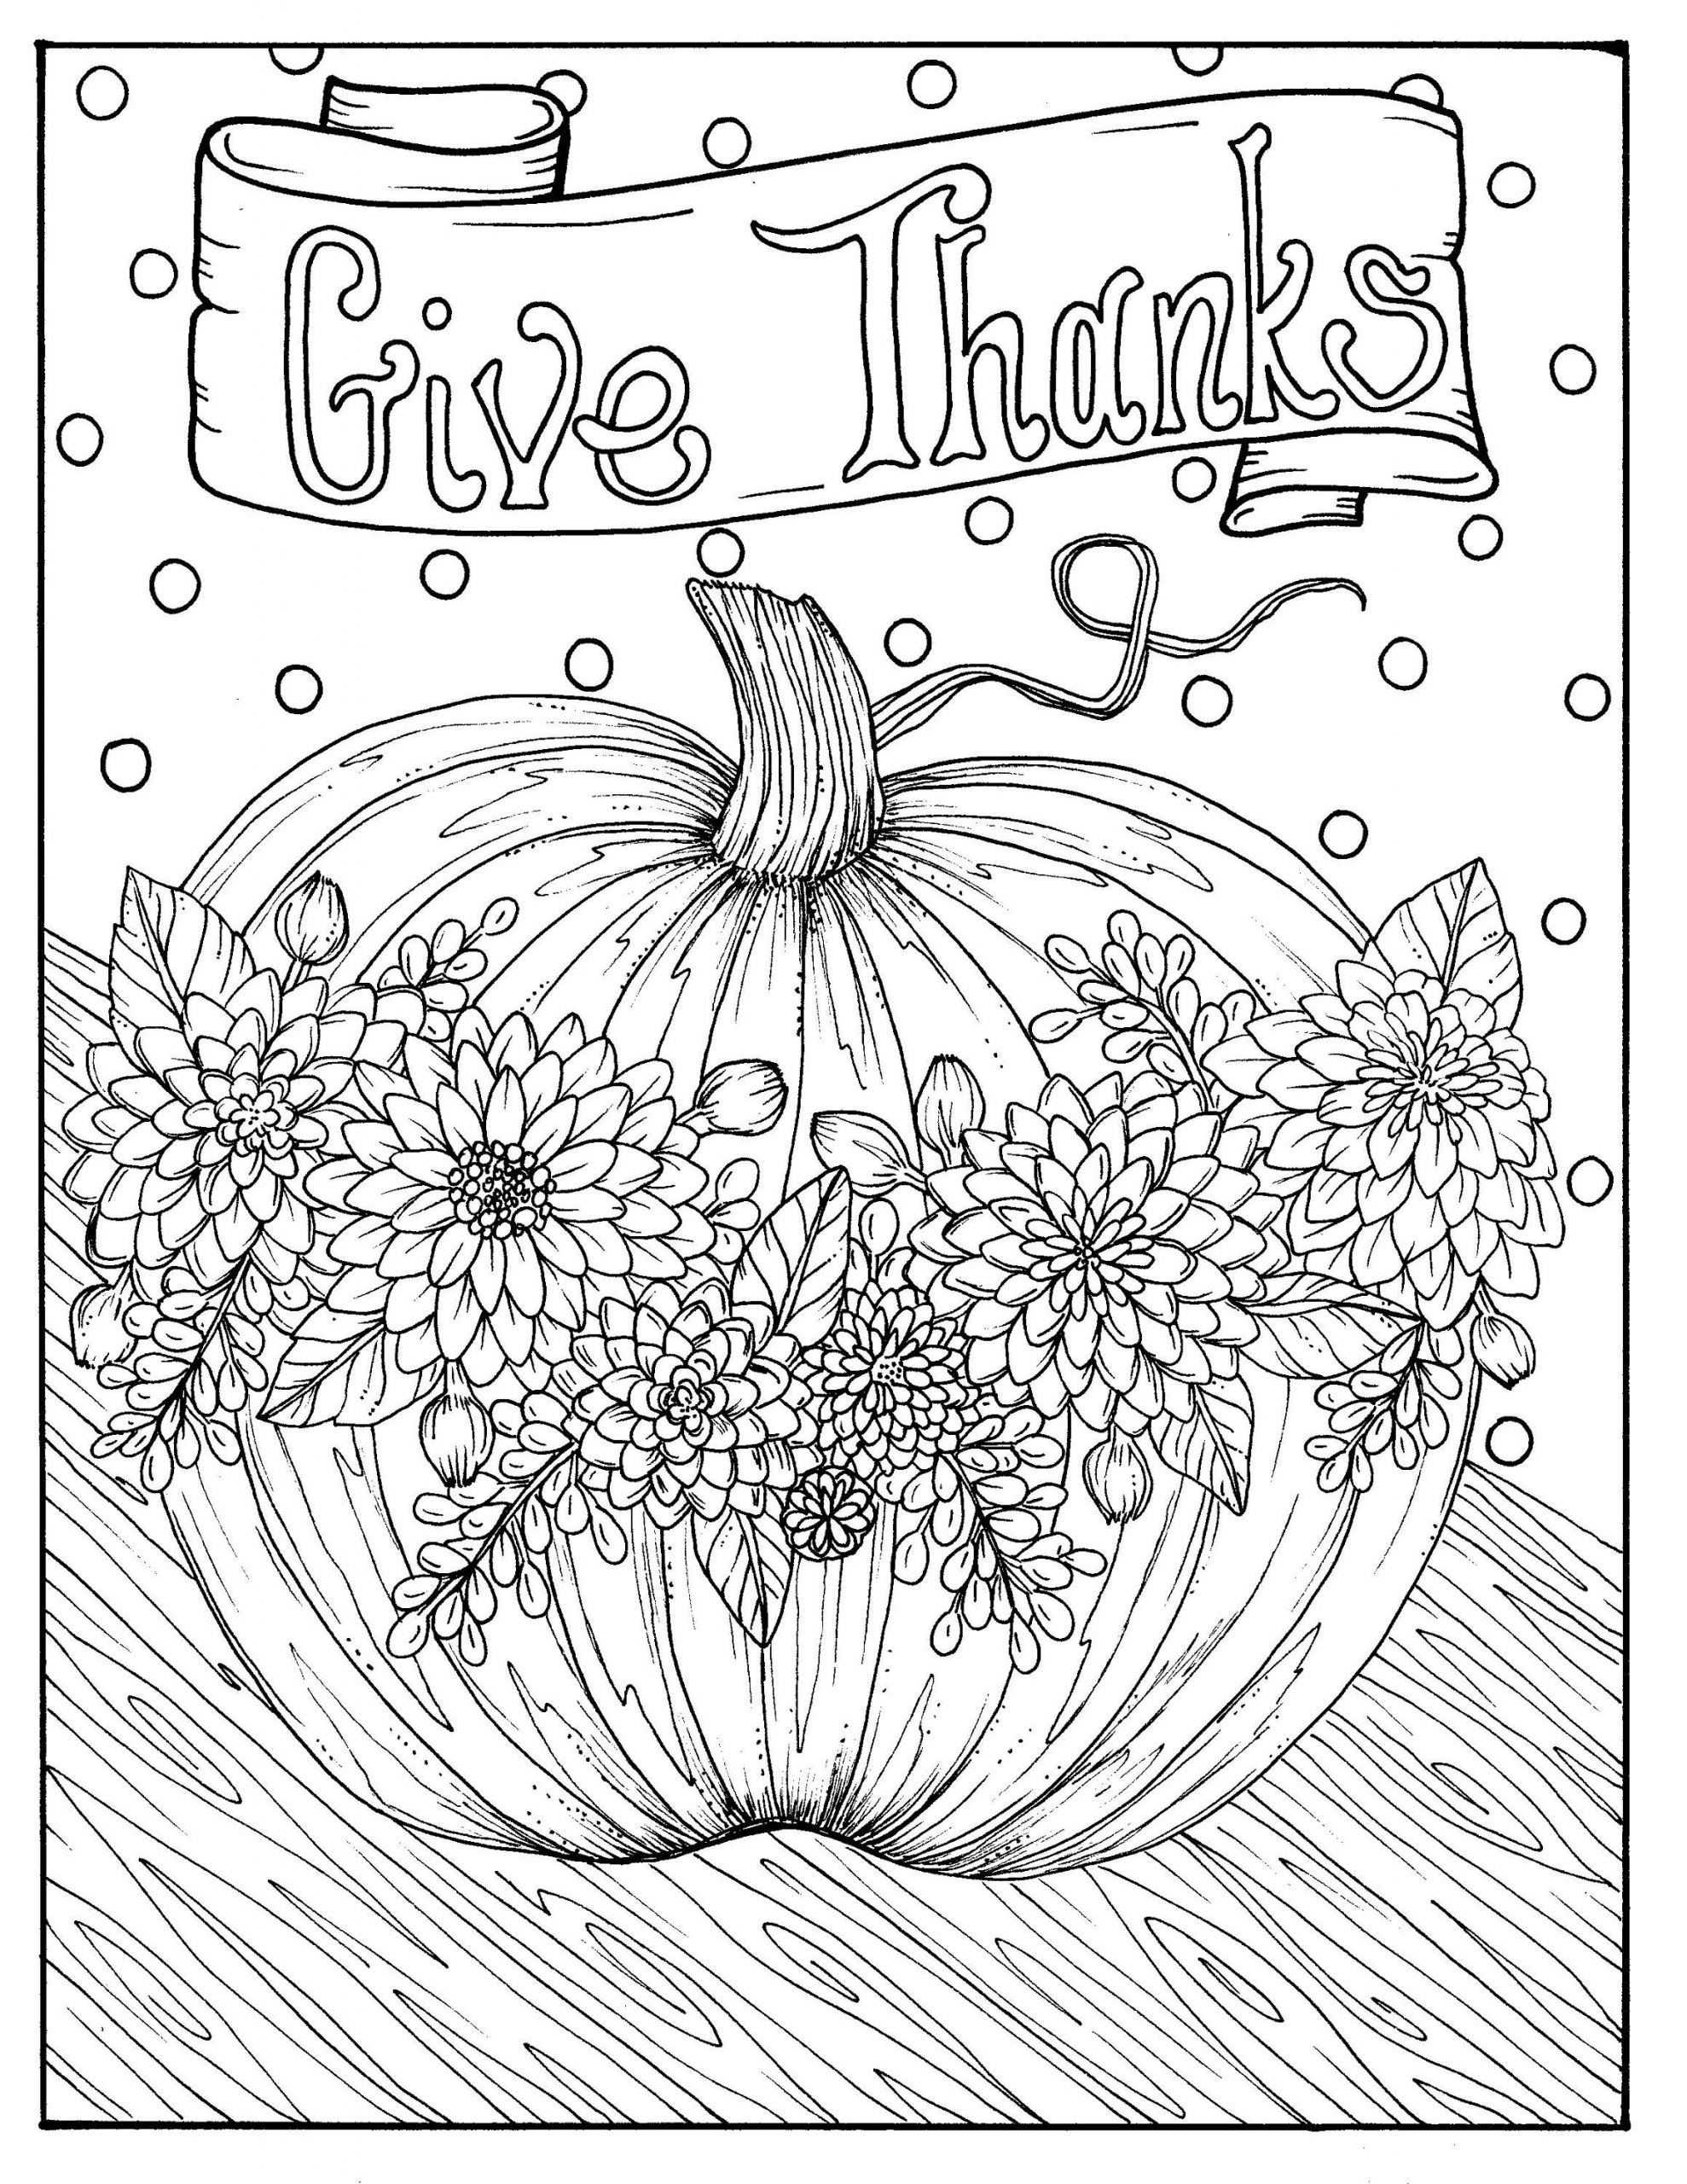 Thanksgiving Adult Coloring Pages
 Give Thanks Digital Coloring page Thanksgiving harvest